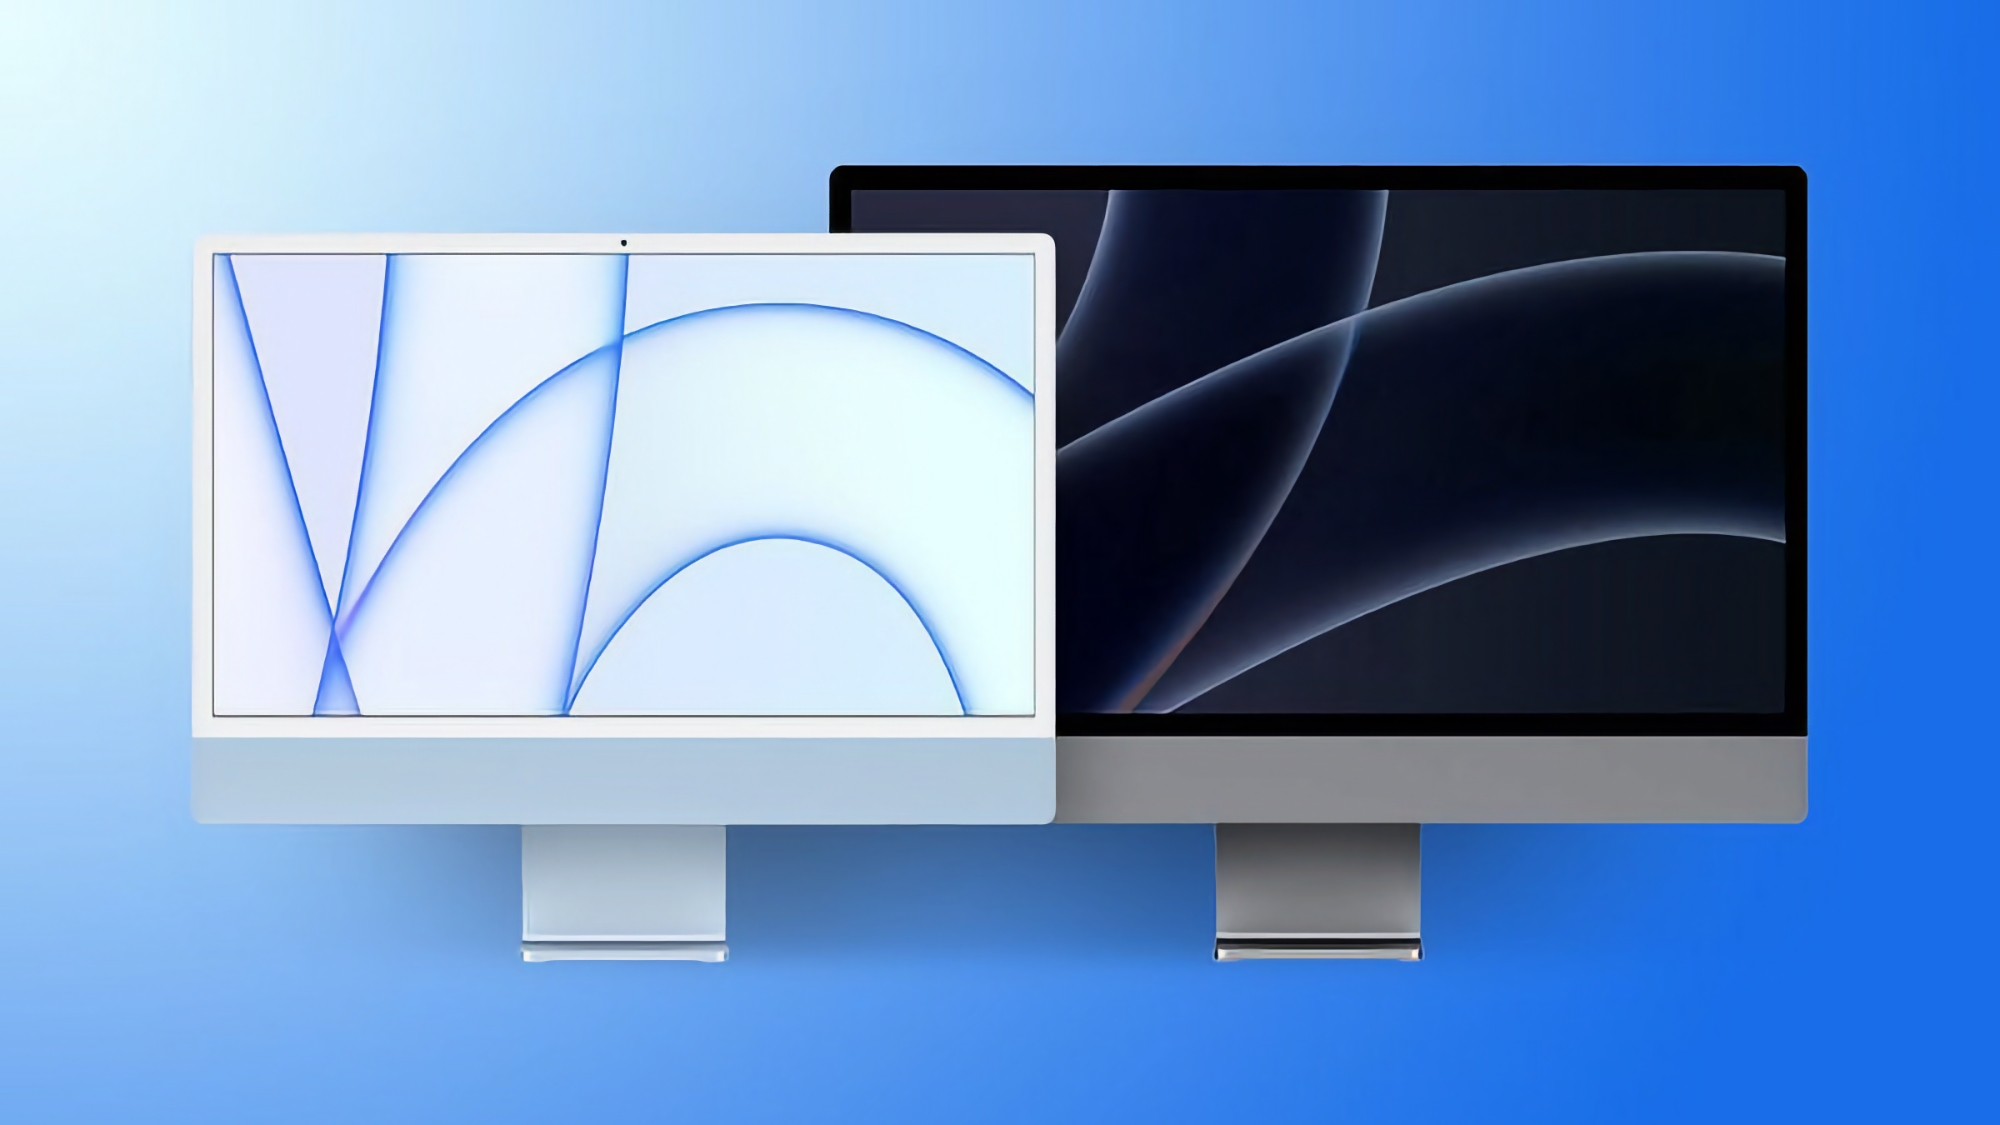 Apple has no plans to release a 27-inch iMac with an ARM processor